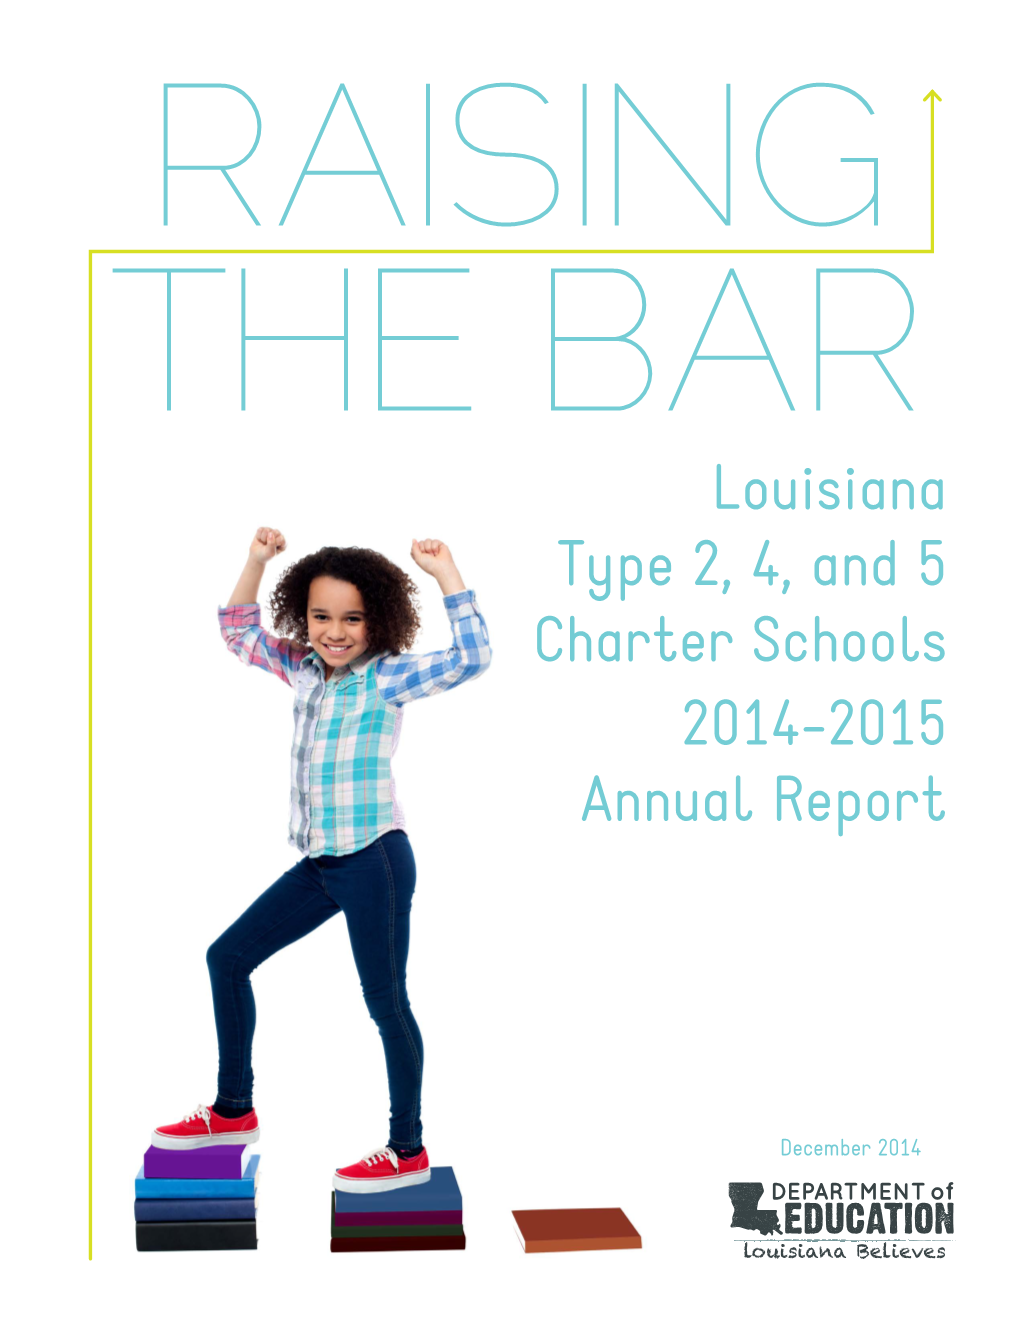 Louisiana Type 2, 4, and 5 Charter Schools 2014-2015 Annual Report